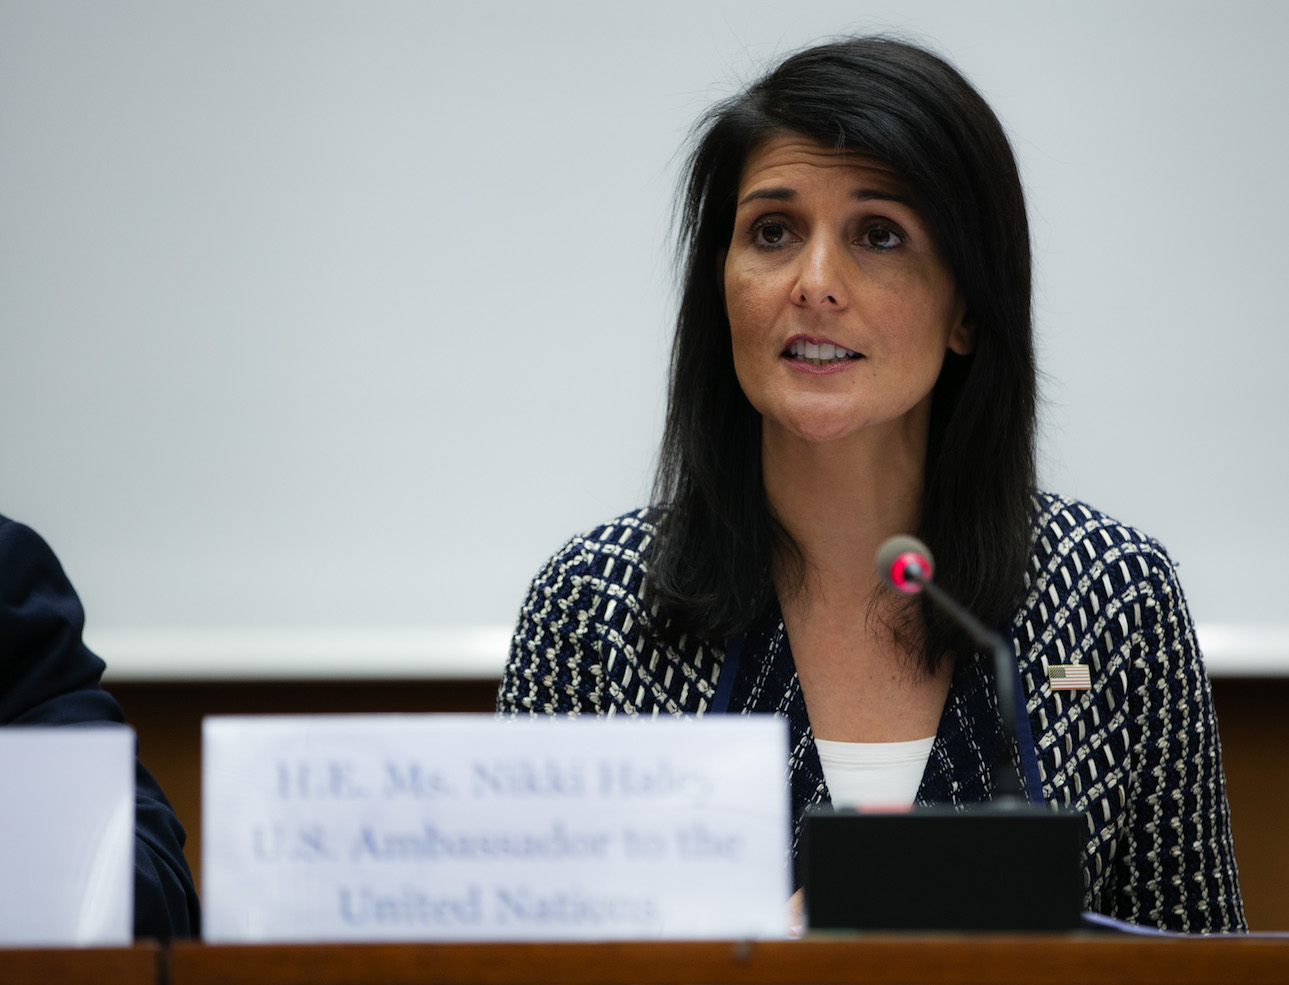 Ambassador Nikki Haley, U.S. Permanent Representative to the United Nations, participated in a Human Rights Council side event organized to focus the attention of the international community on the human rights crisis in Venezuela. Read the Ambassador's remarks: https://geneva.usmission.gov/2017/06/06/ambassador-nikki-haley-remarks-on-venezuela-at-human-rights-council-side-event/

U.S. Mission Photo/Eric Bridiers